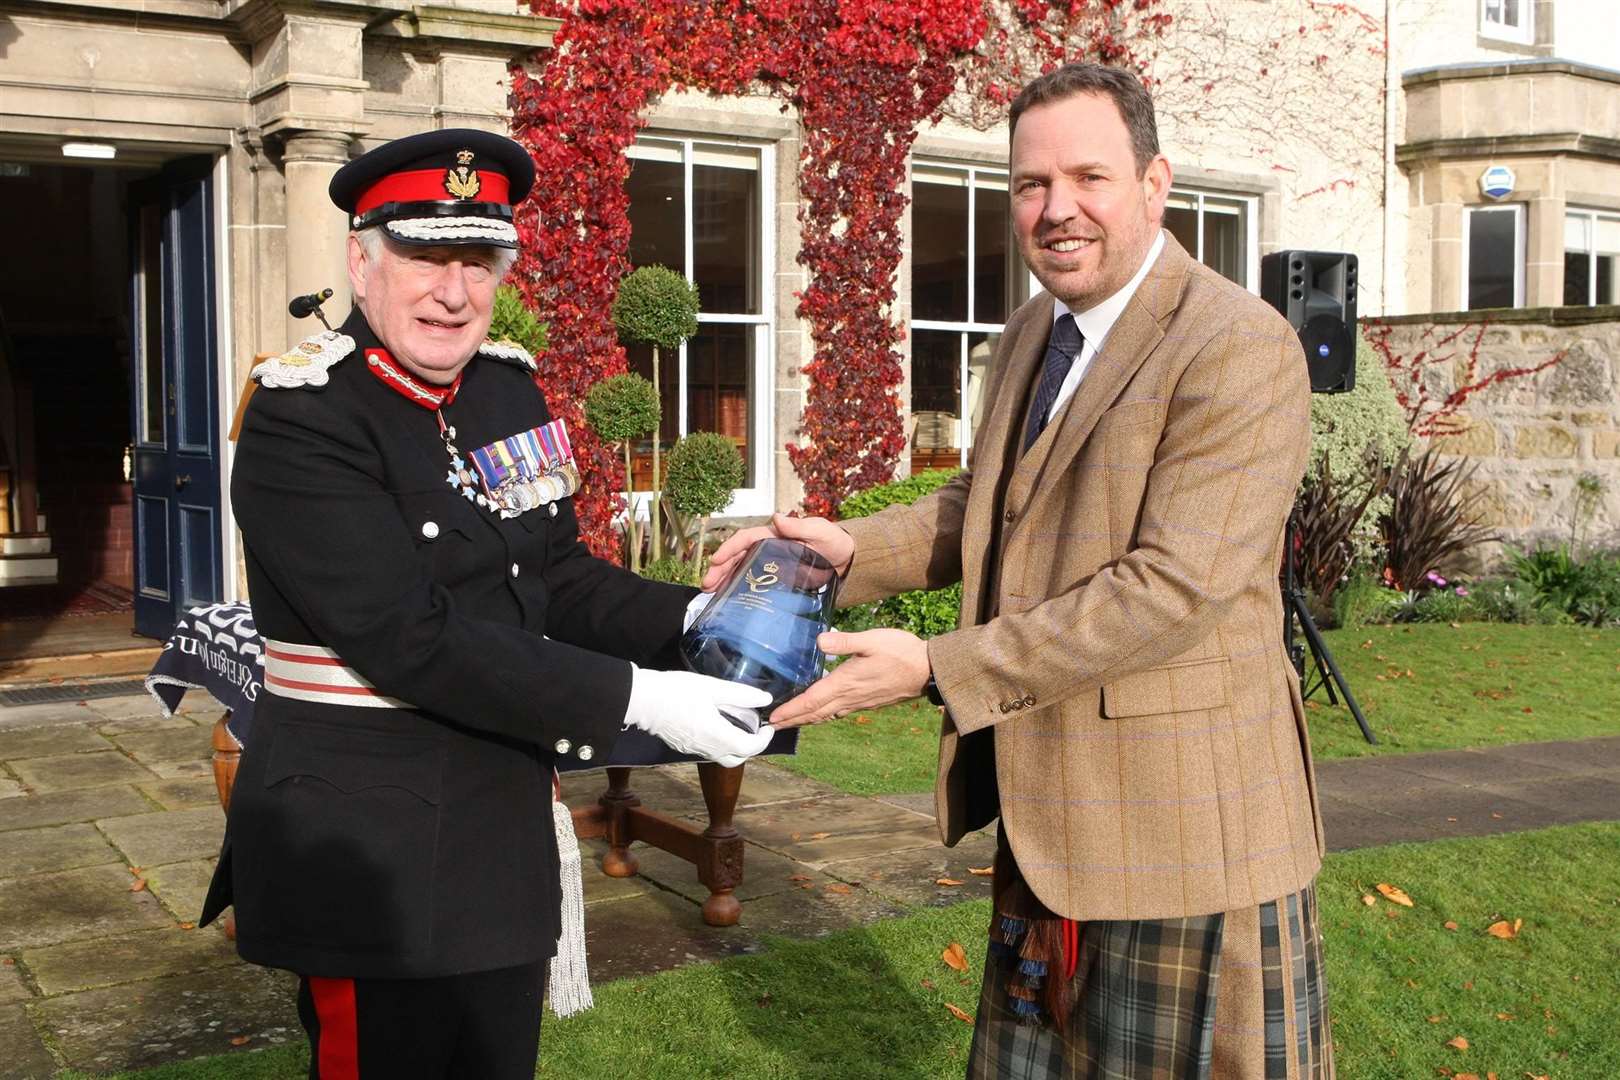 Johnstons of Elgin CEO, Simon Cotton, receives the Queen’s Award from Major General the Honourable Seymour Monro CBE LVO, Lord Lieutenant of Moray on behalf of Her Majesty The Queen.